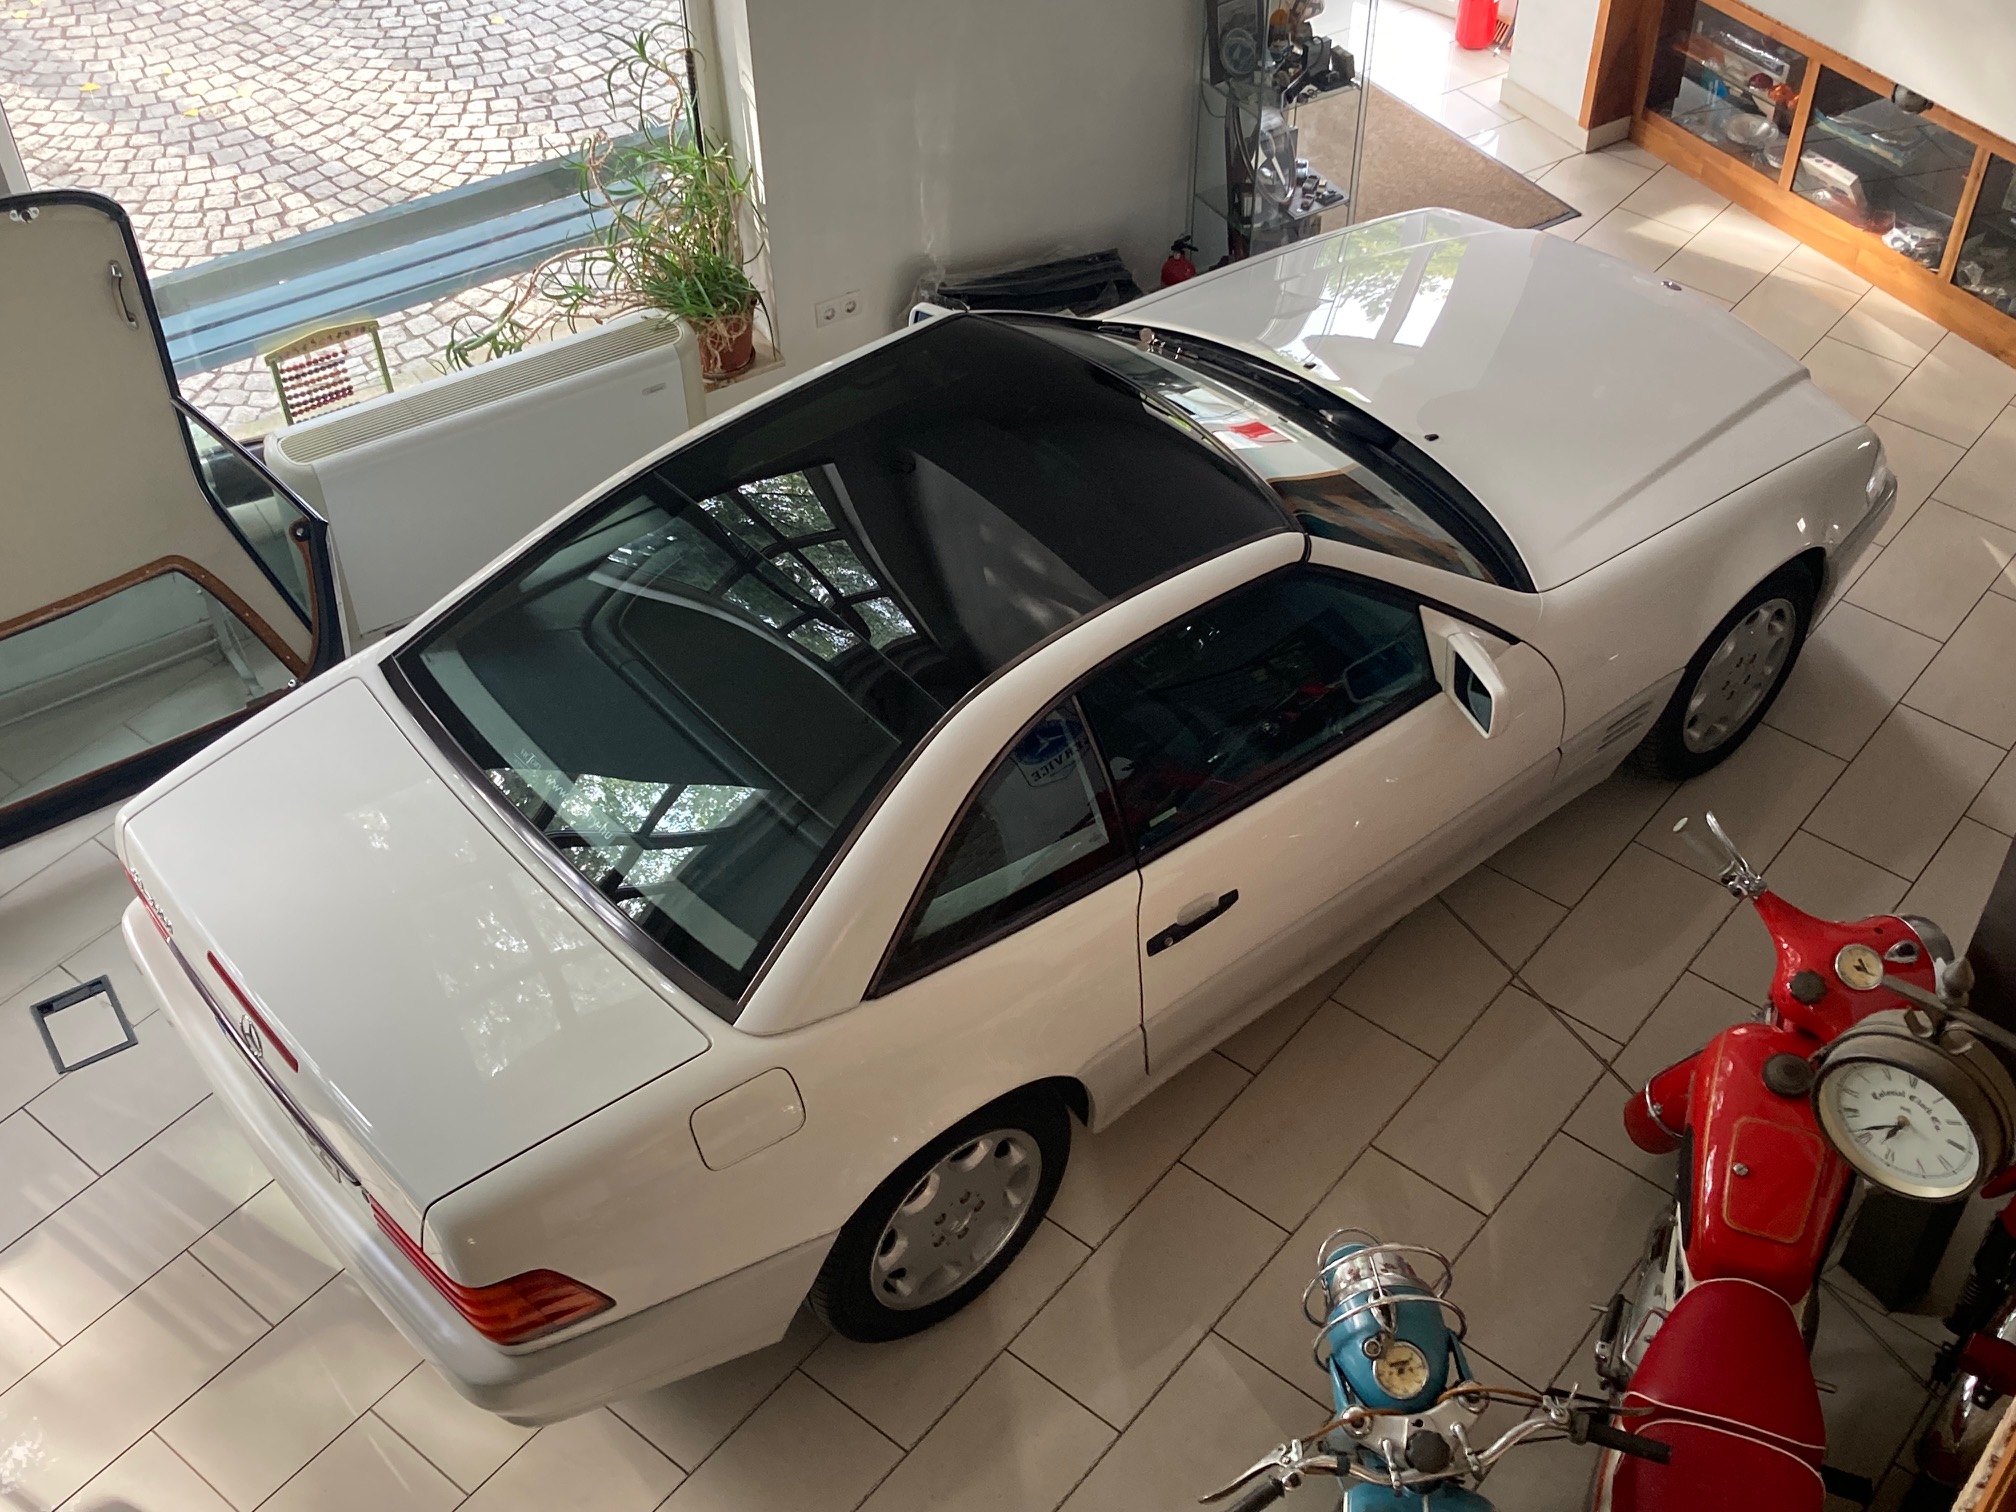 Mercedes Benz W129 500 SL Panorama Roof